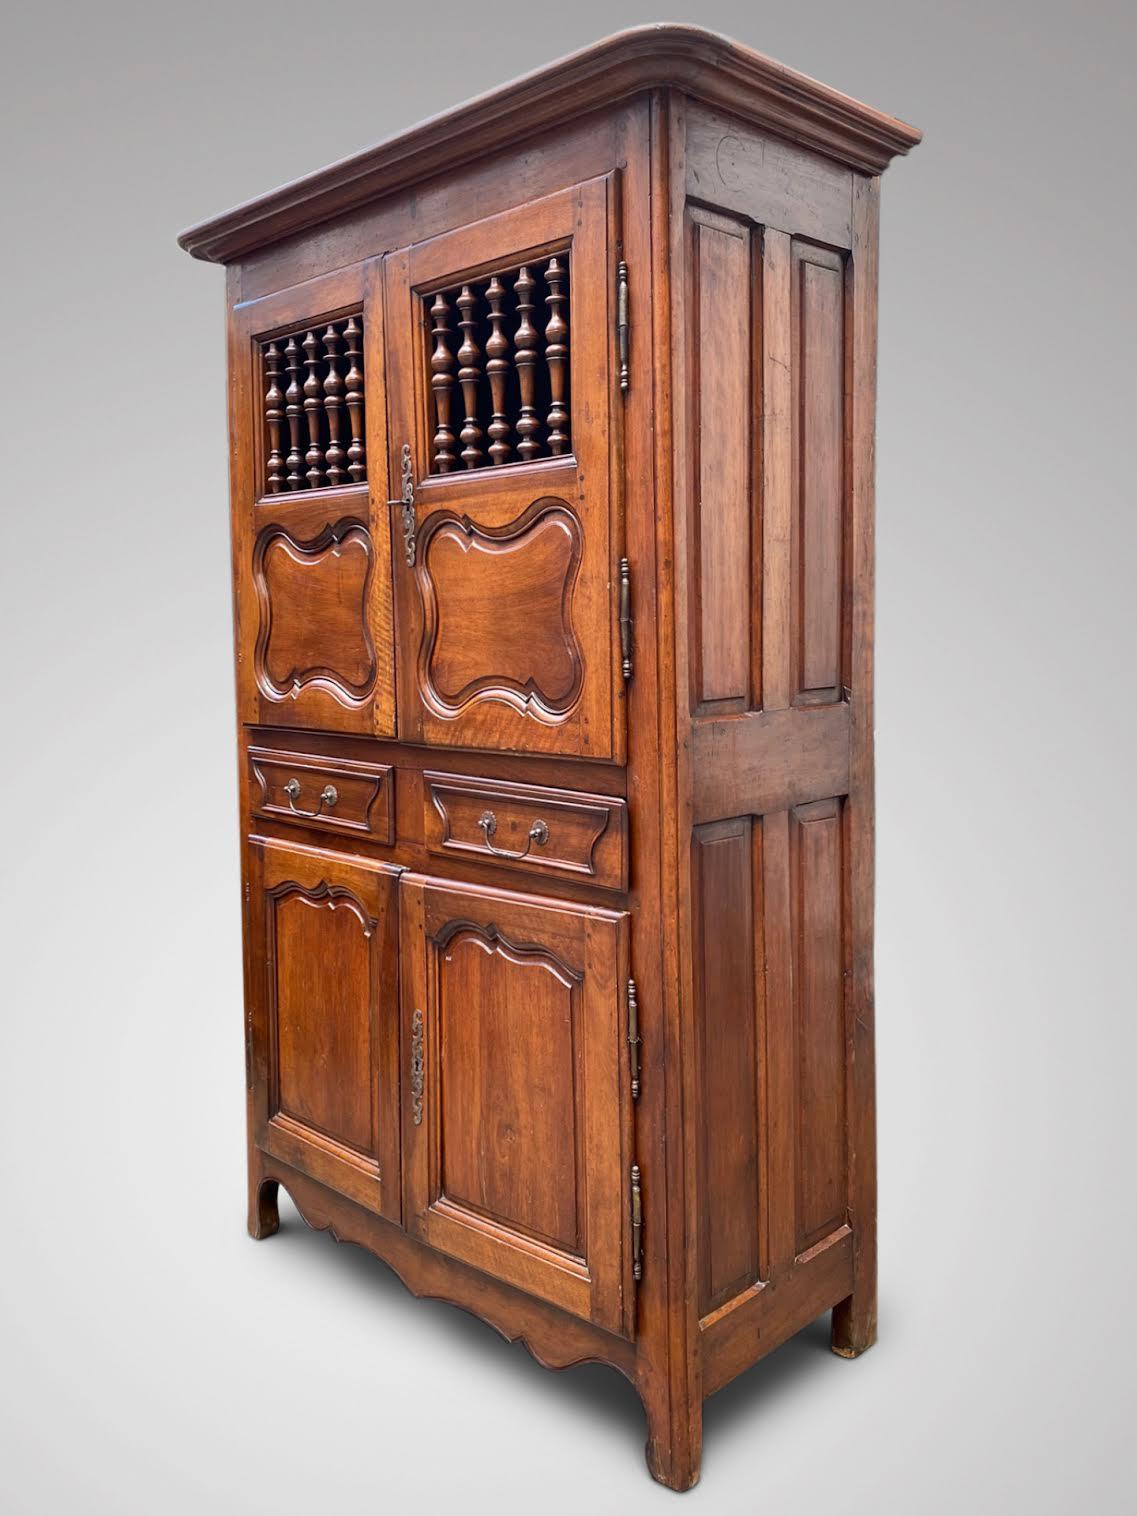 Hand-Carved Stunning French Mangeadou or Pantry in Walnut from the Provence